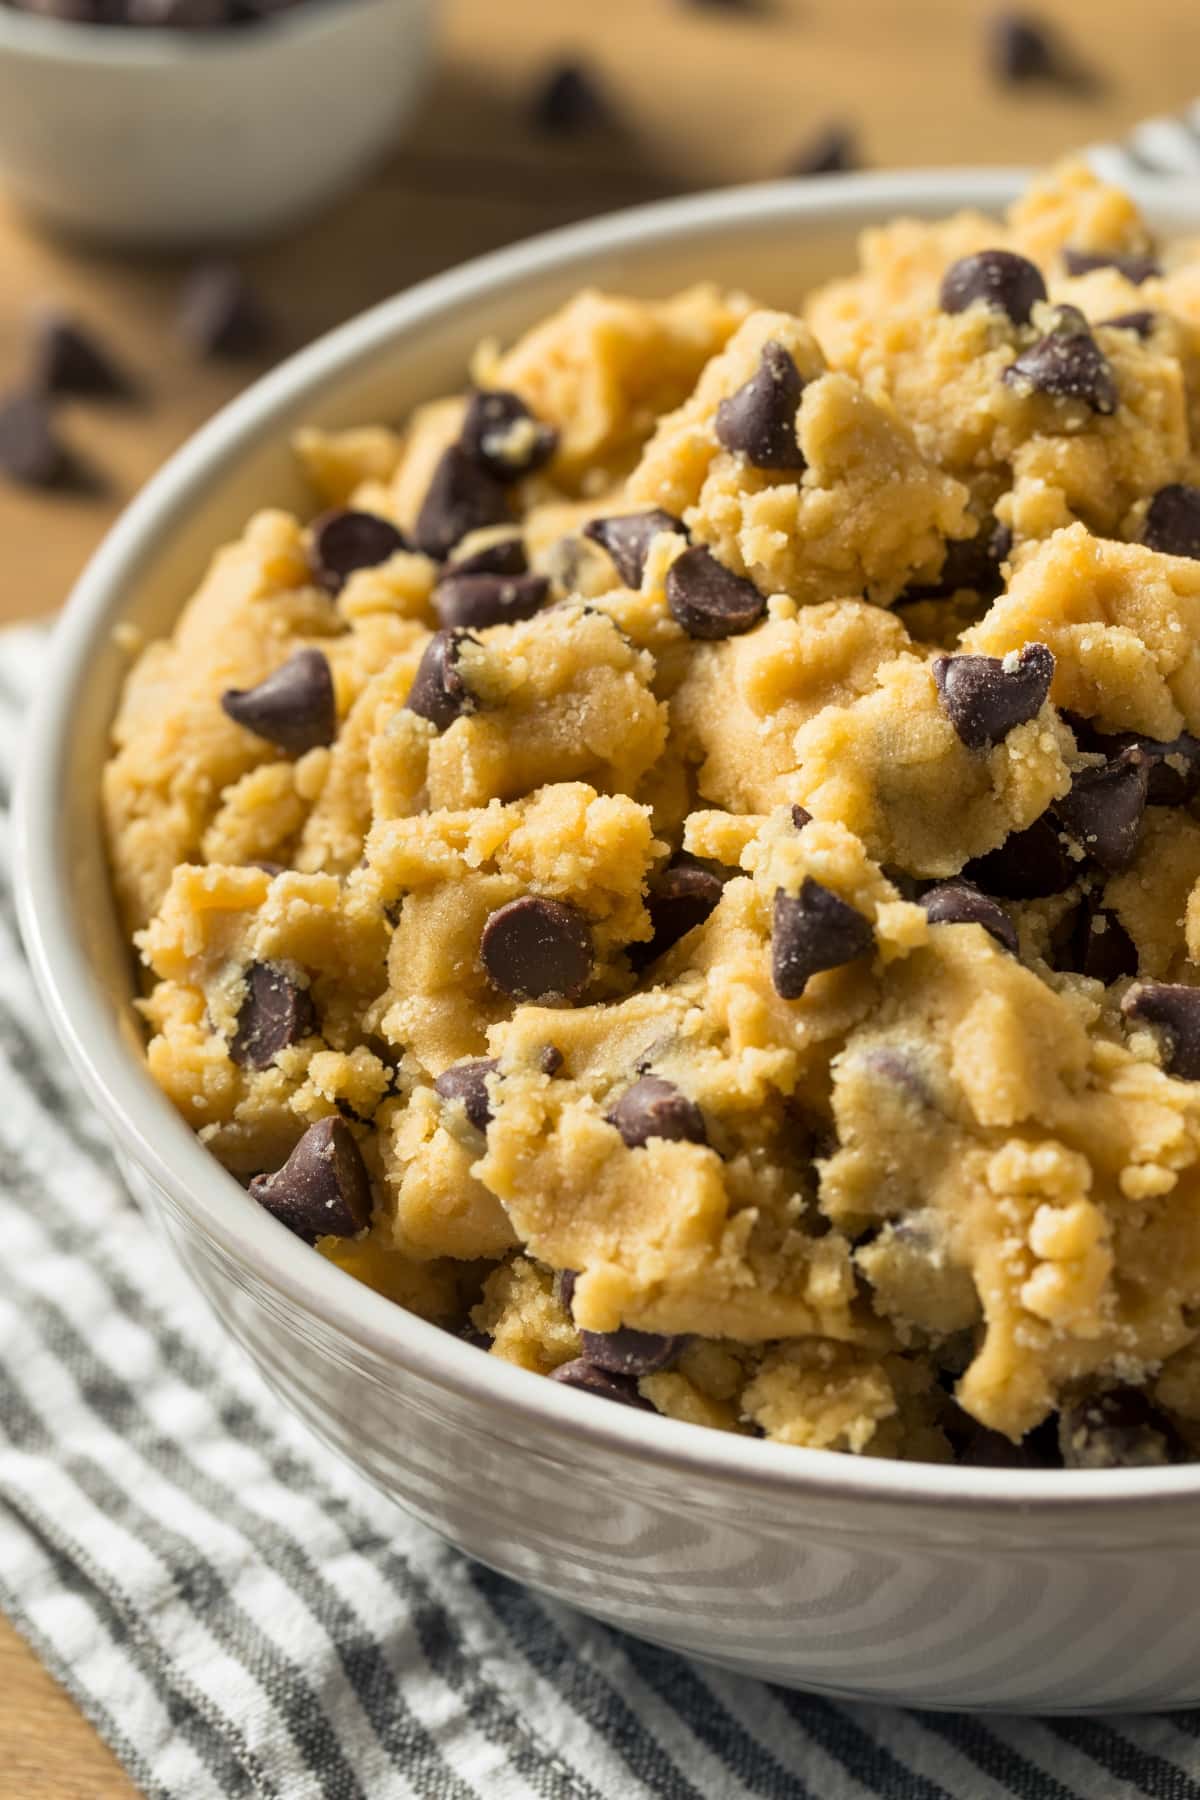 Cottage Cheese Cookie Dough in a Bowl